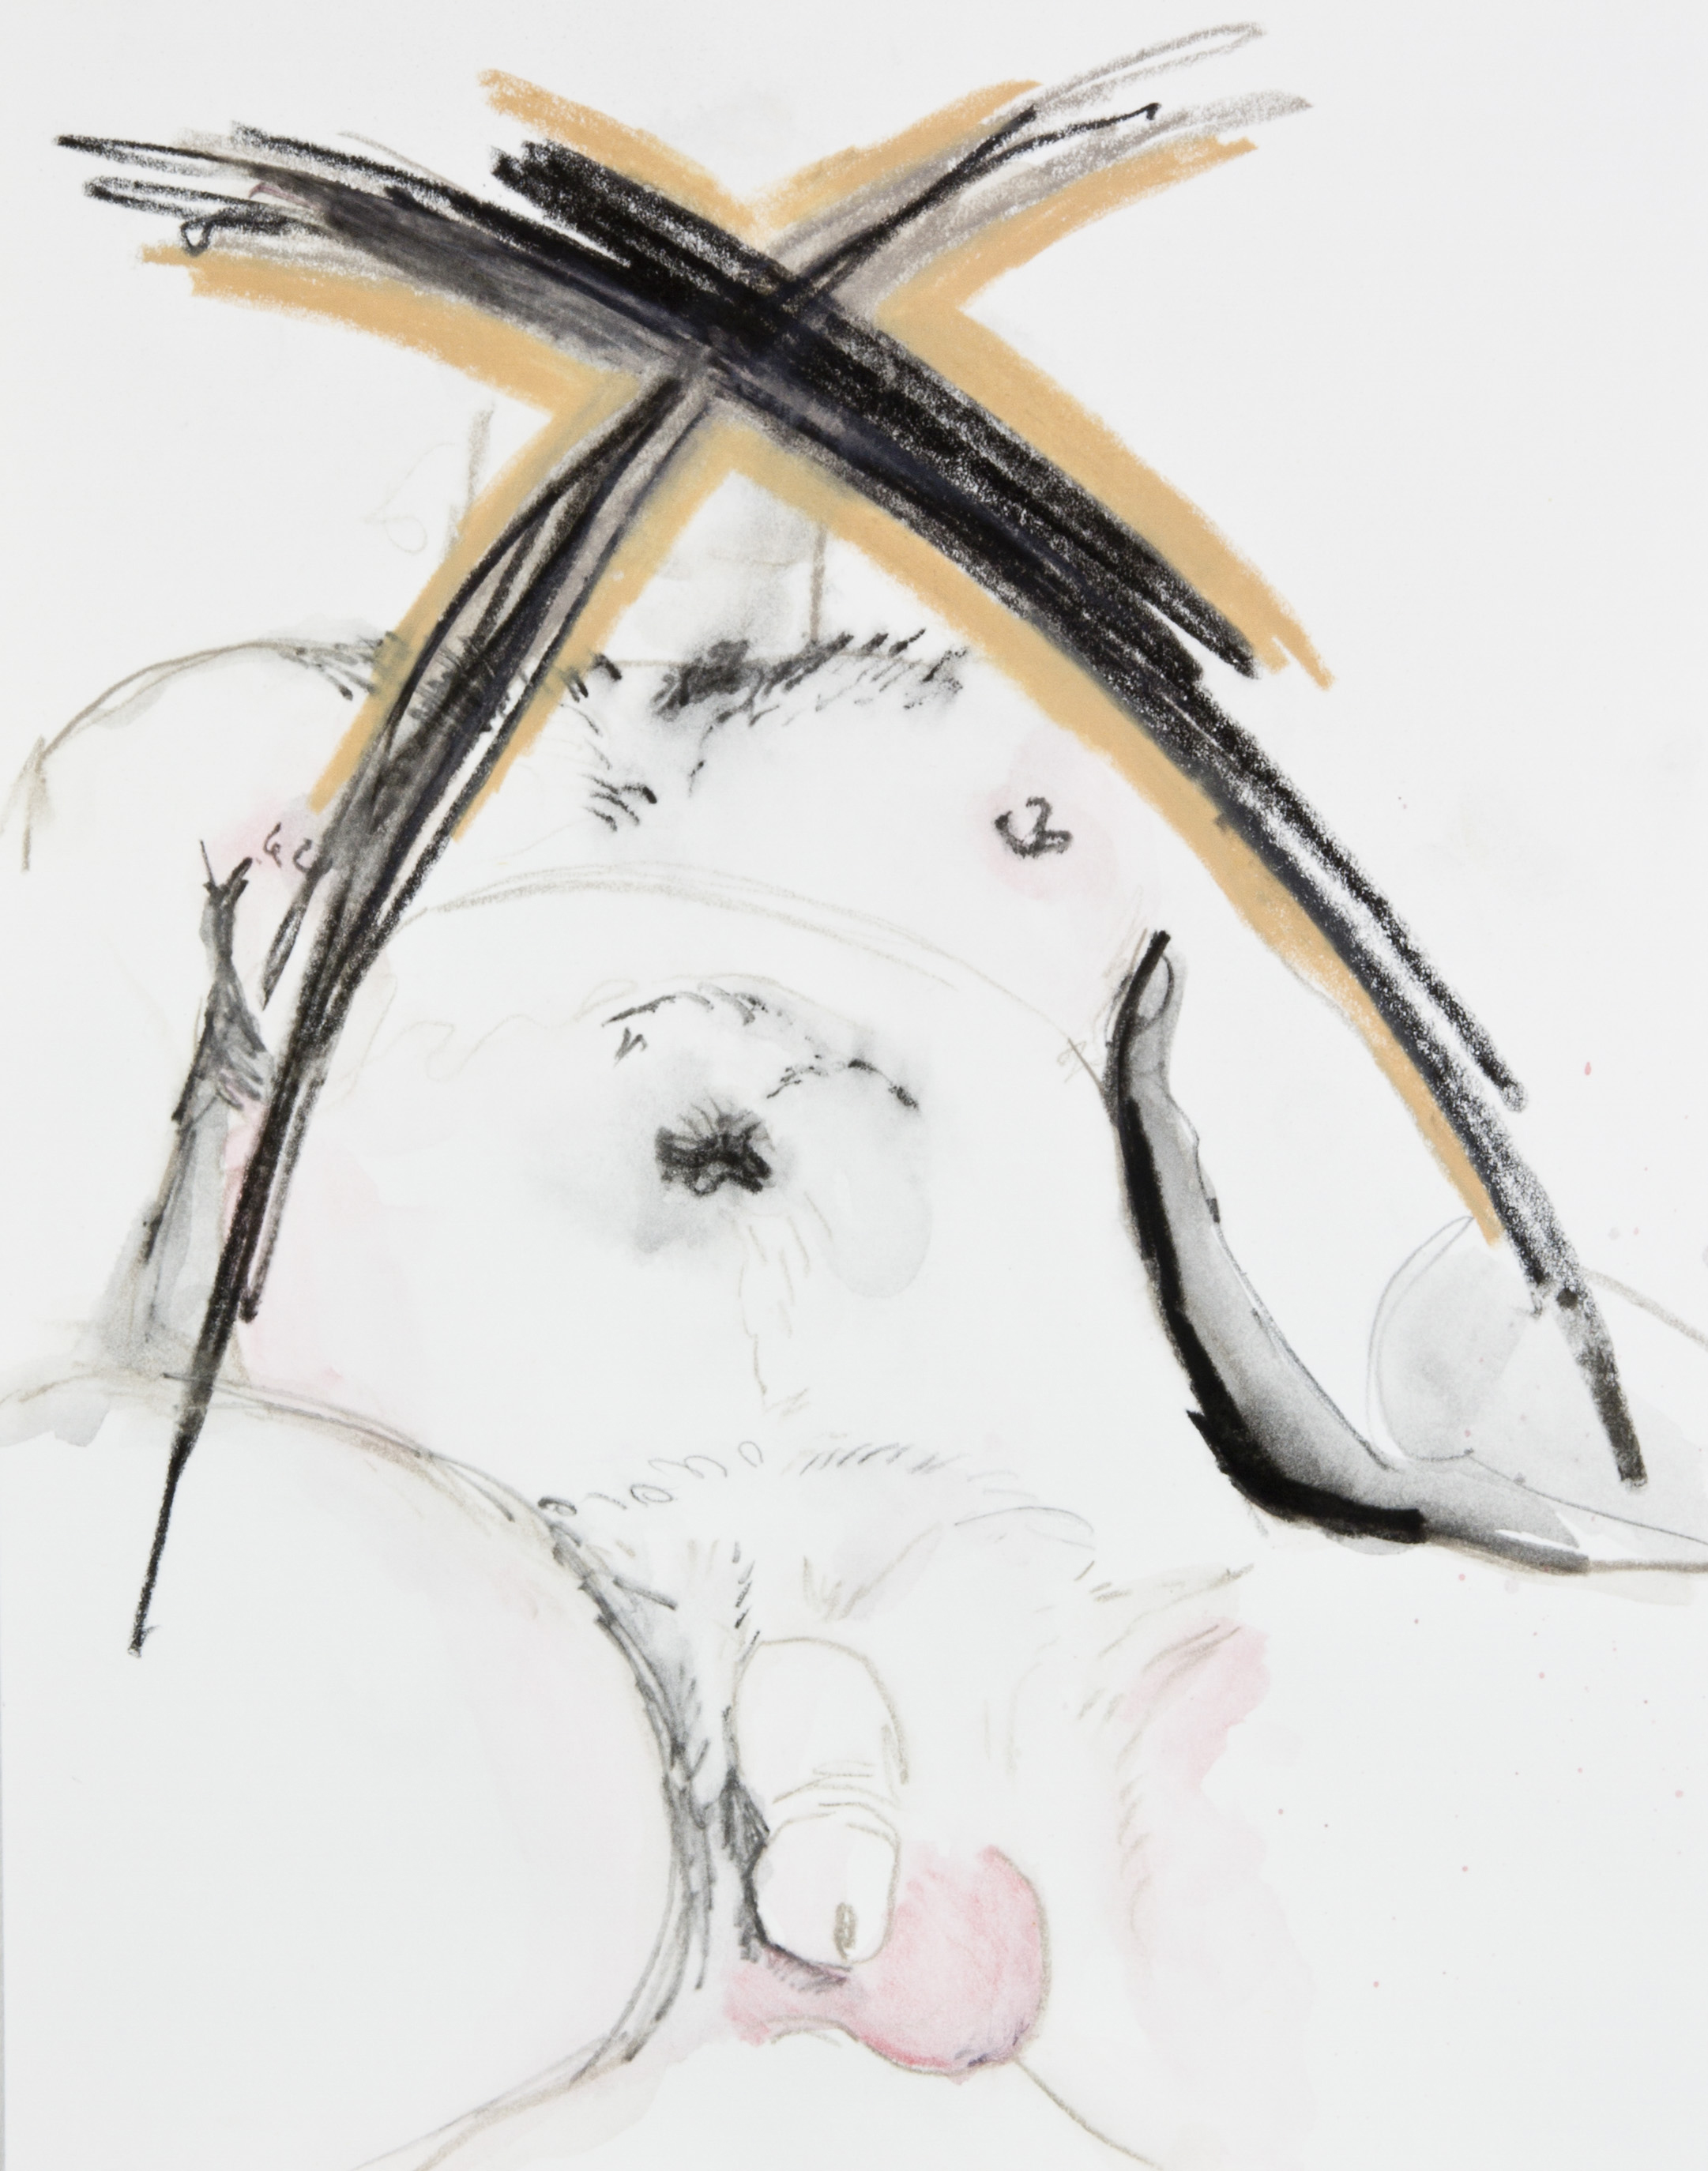 X Marks It, 2013, graphite, crayon and watercolor pencil on paper, 11x14 inches